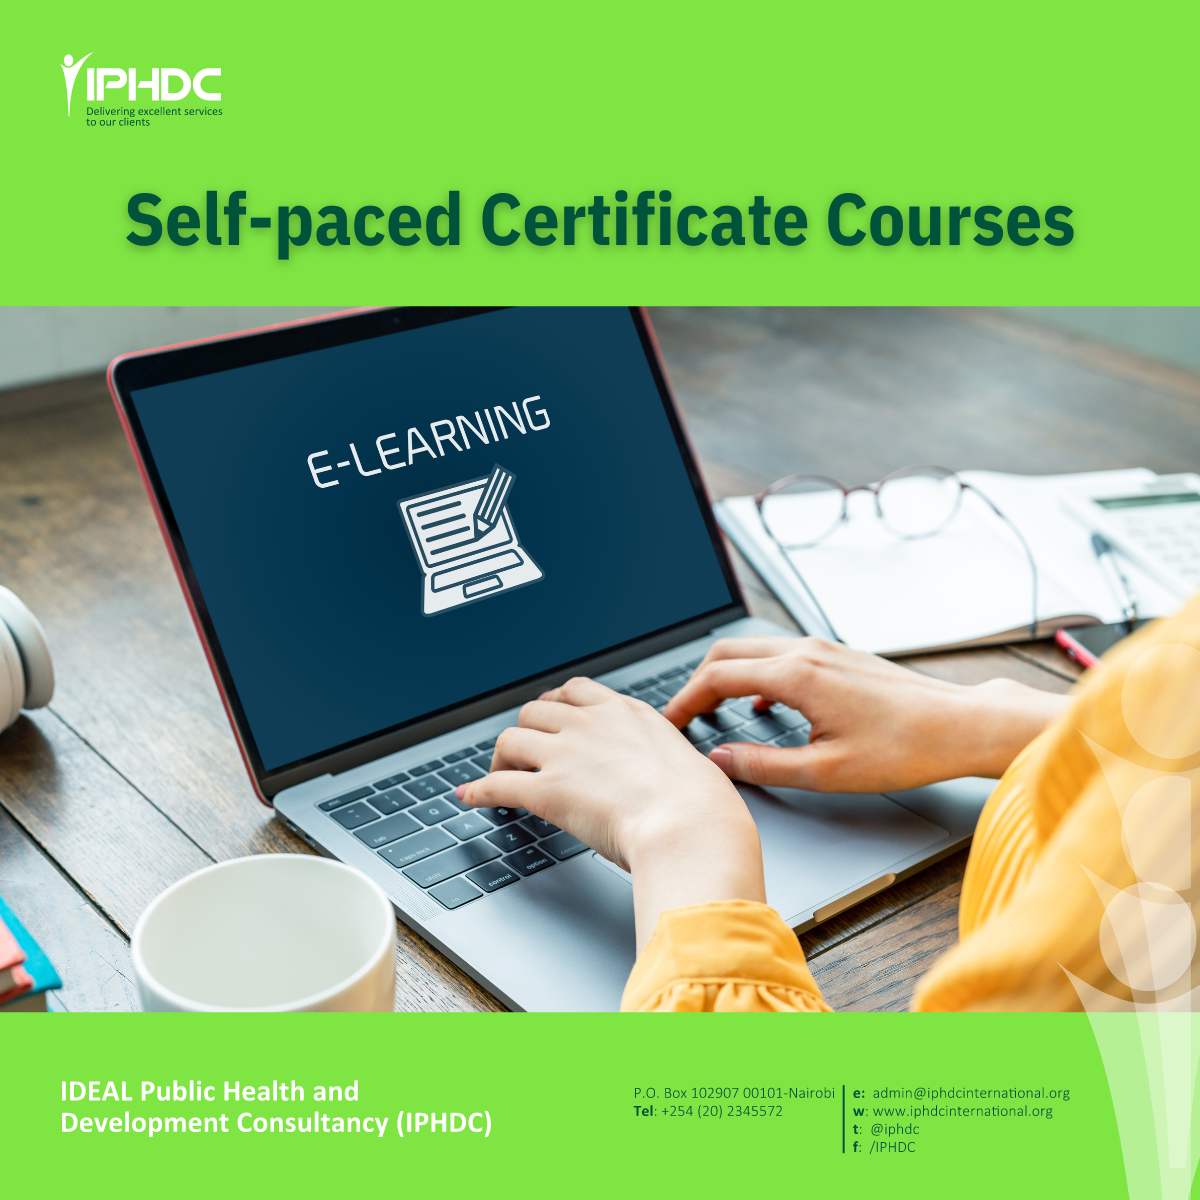 Selfpaced Elearning Certificate Courses IDEAL Public Health and